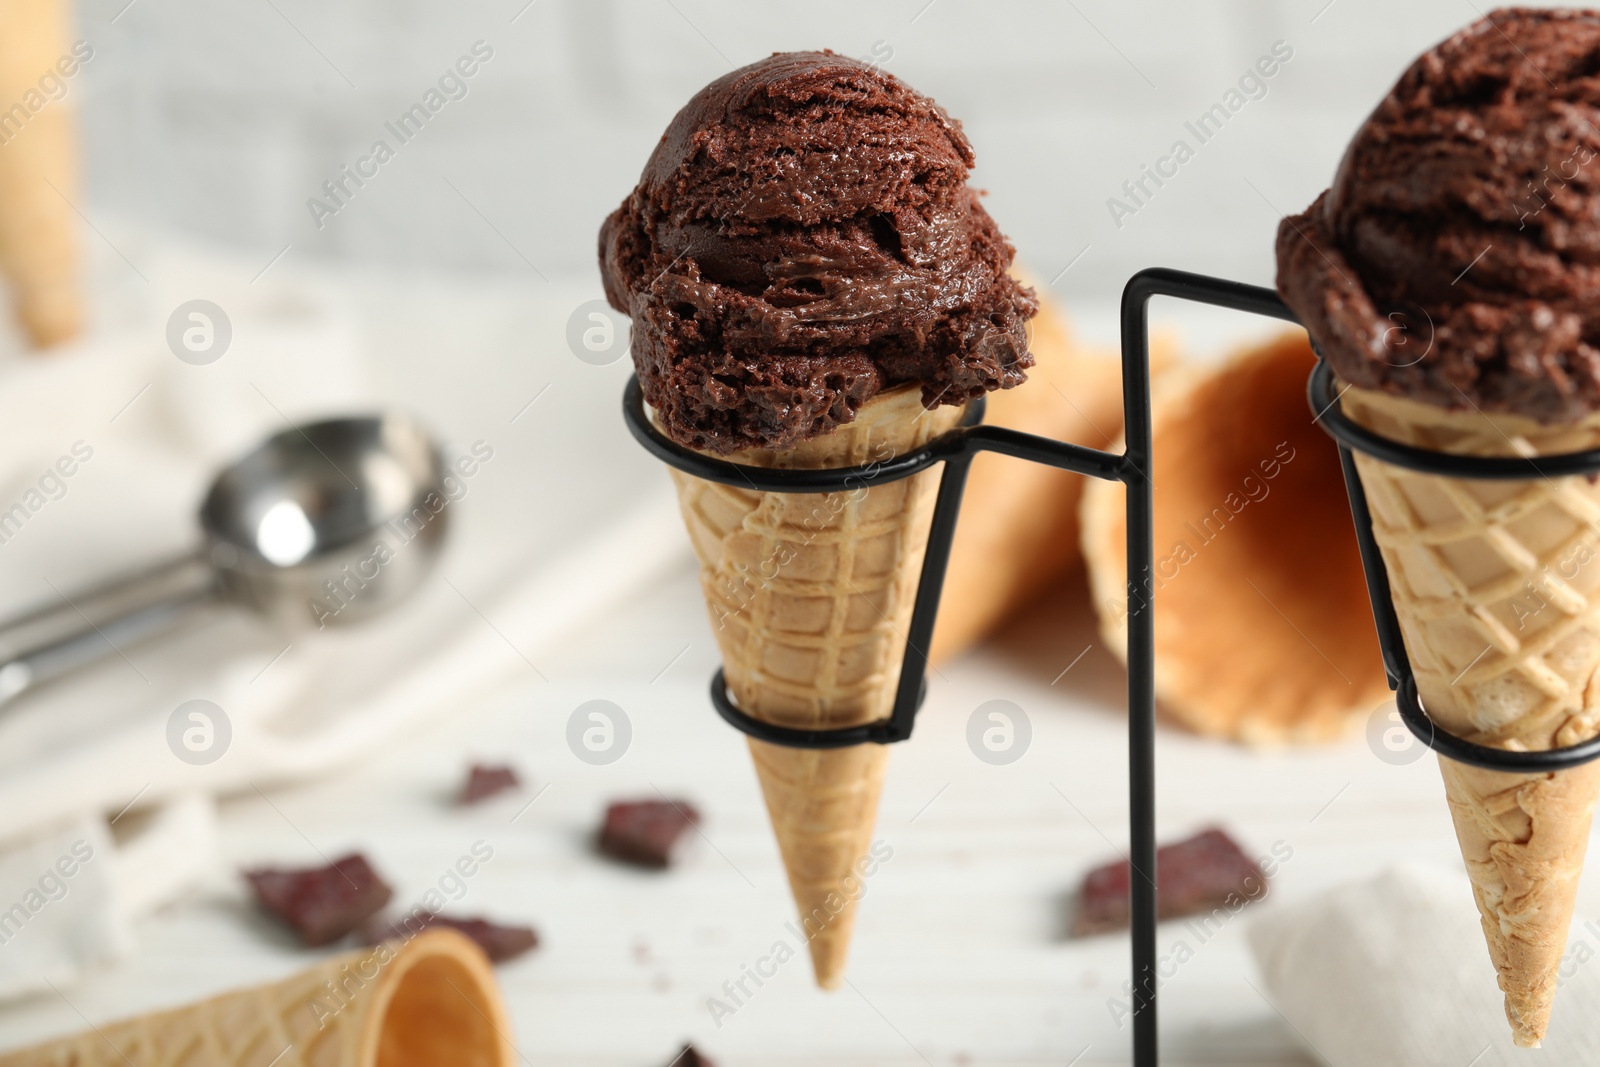 Photo of Chocolate ice cream scoops in wafer cones on stand, closeup. Space for text